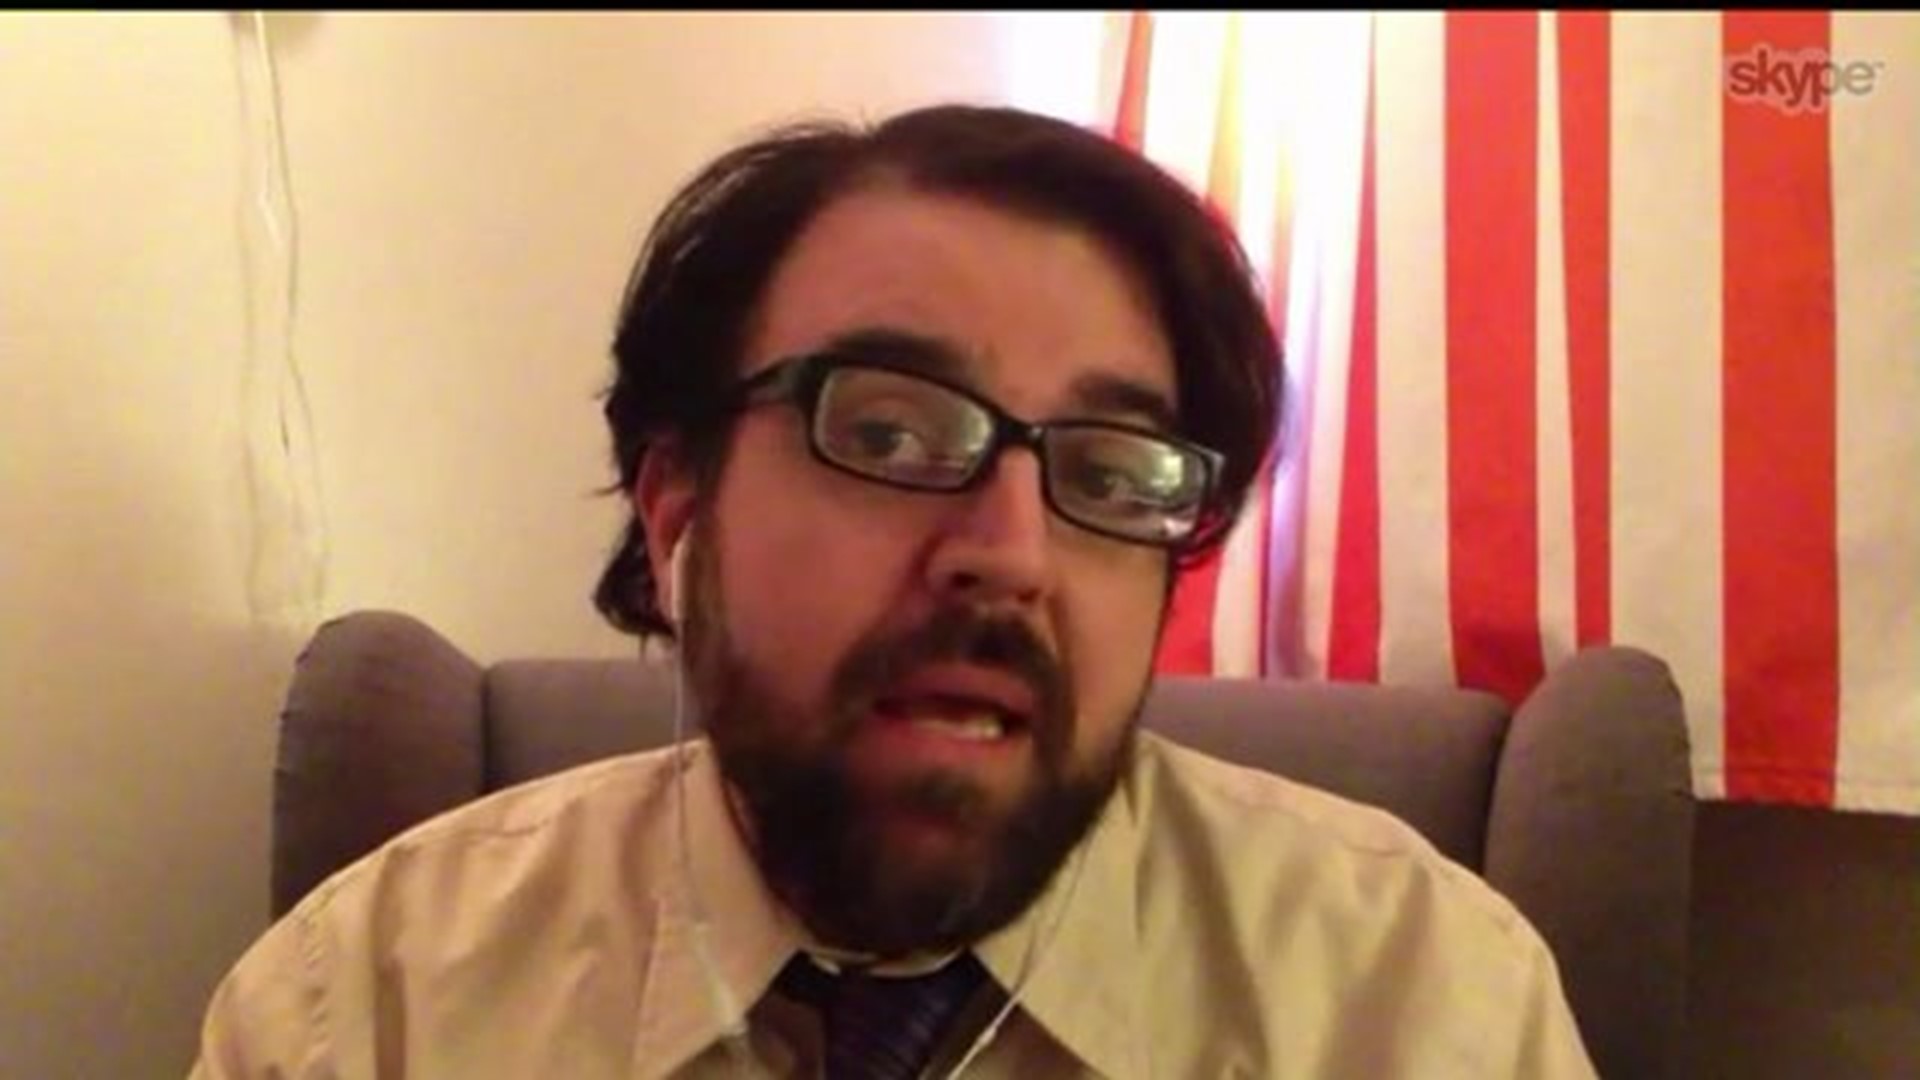 Sony hack theater threat Skype interview with Dr. Colin Helb